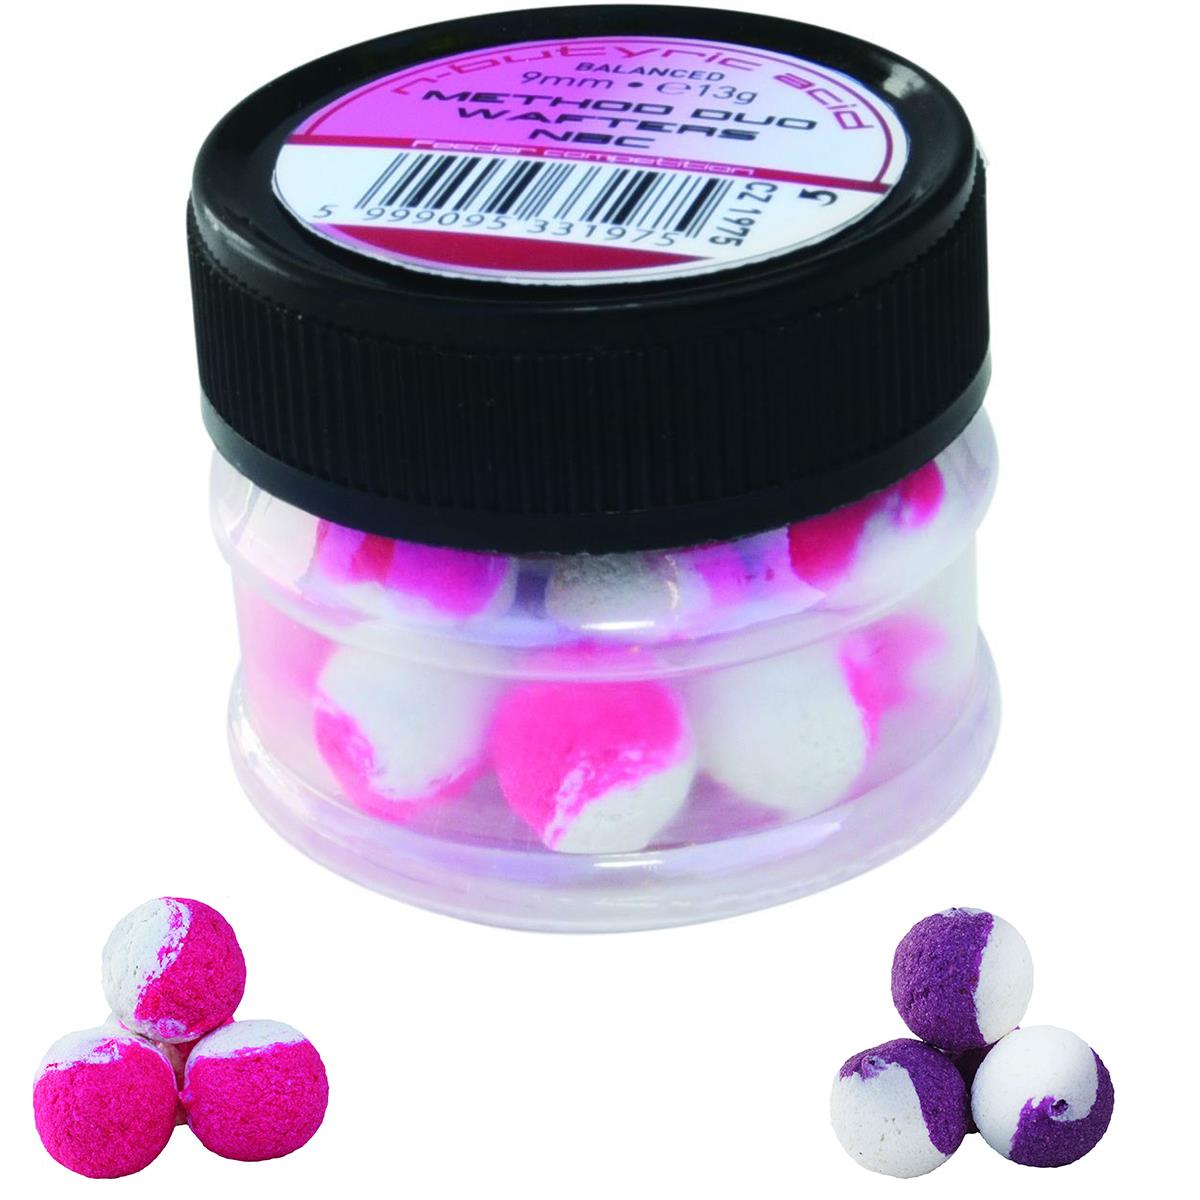 WAFTERS FC METHOD FEEDER NBC DUO 9mm 13gr Pink-White